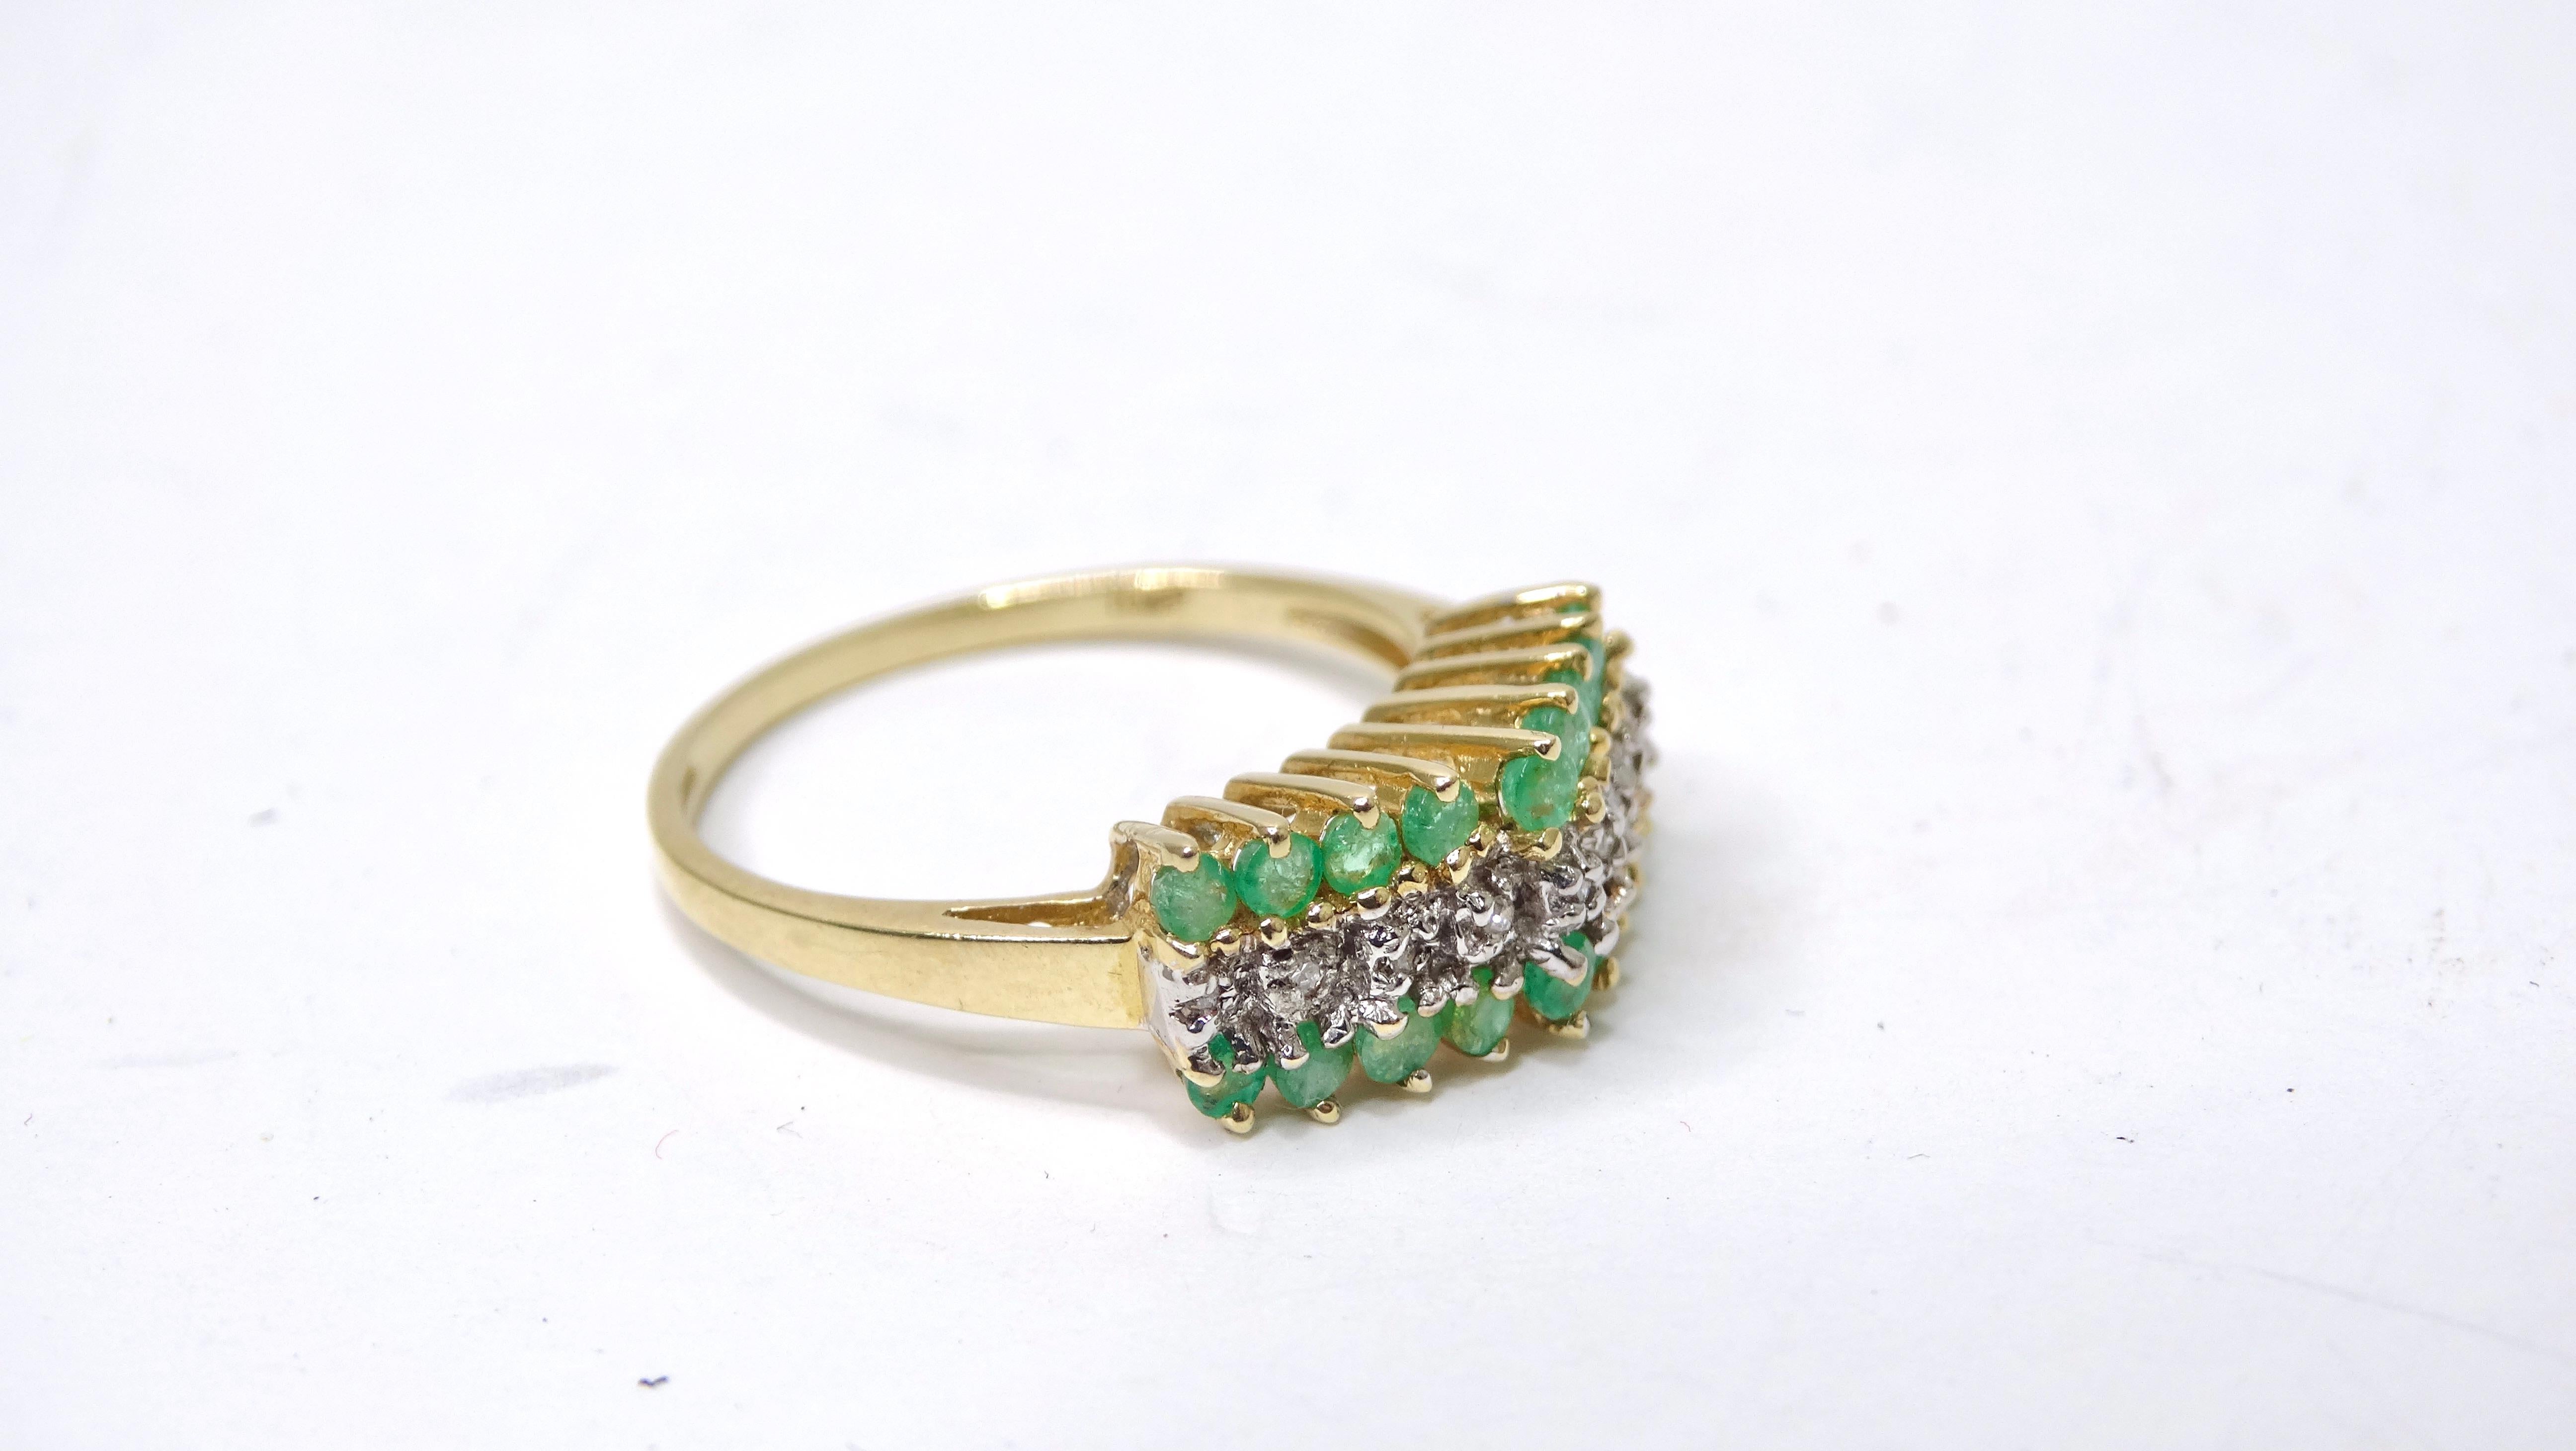 This ring is eye-candy! The sparkle and detail will have you drooling. There is something so effortless and interesting about a clustered ring. This ring features a yellow 14k gold band that still has a bright and bold color with 18 emeralds and 9